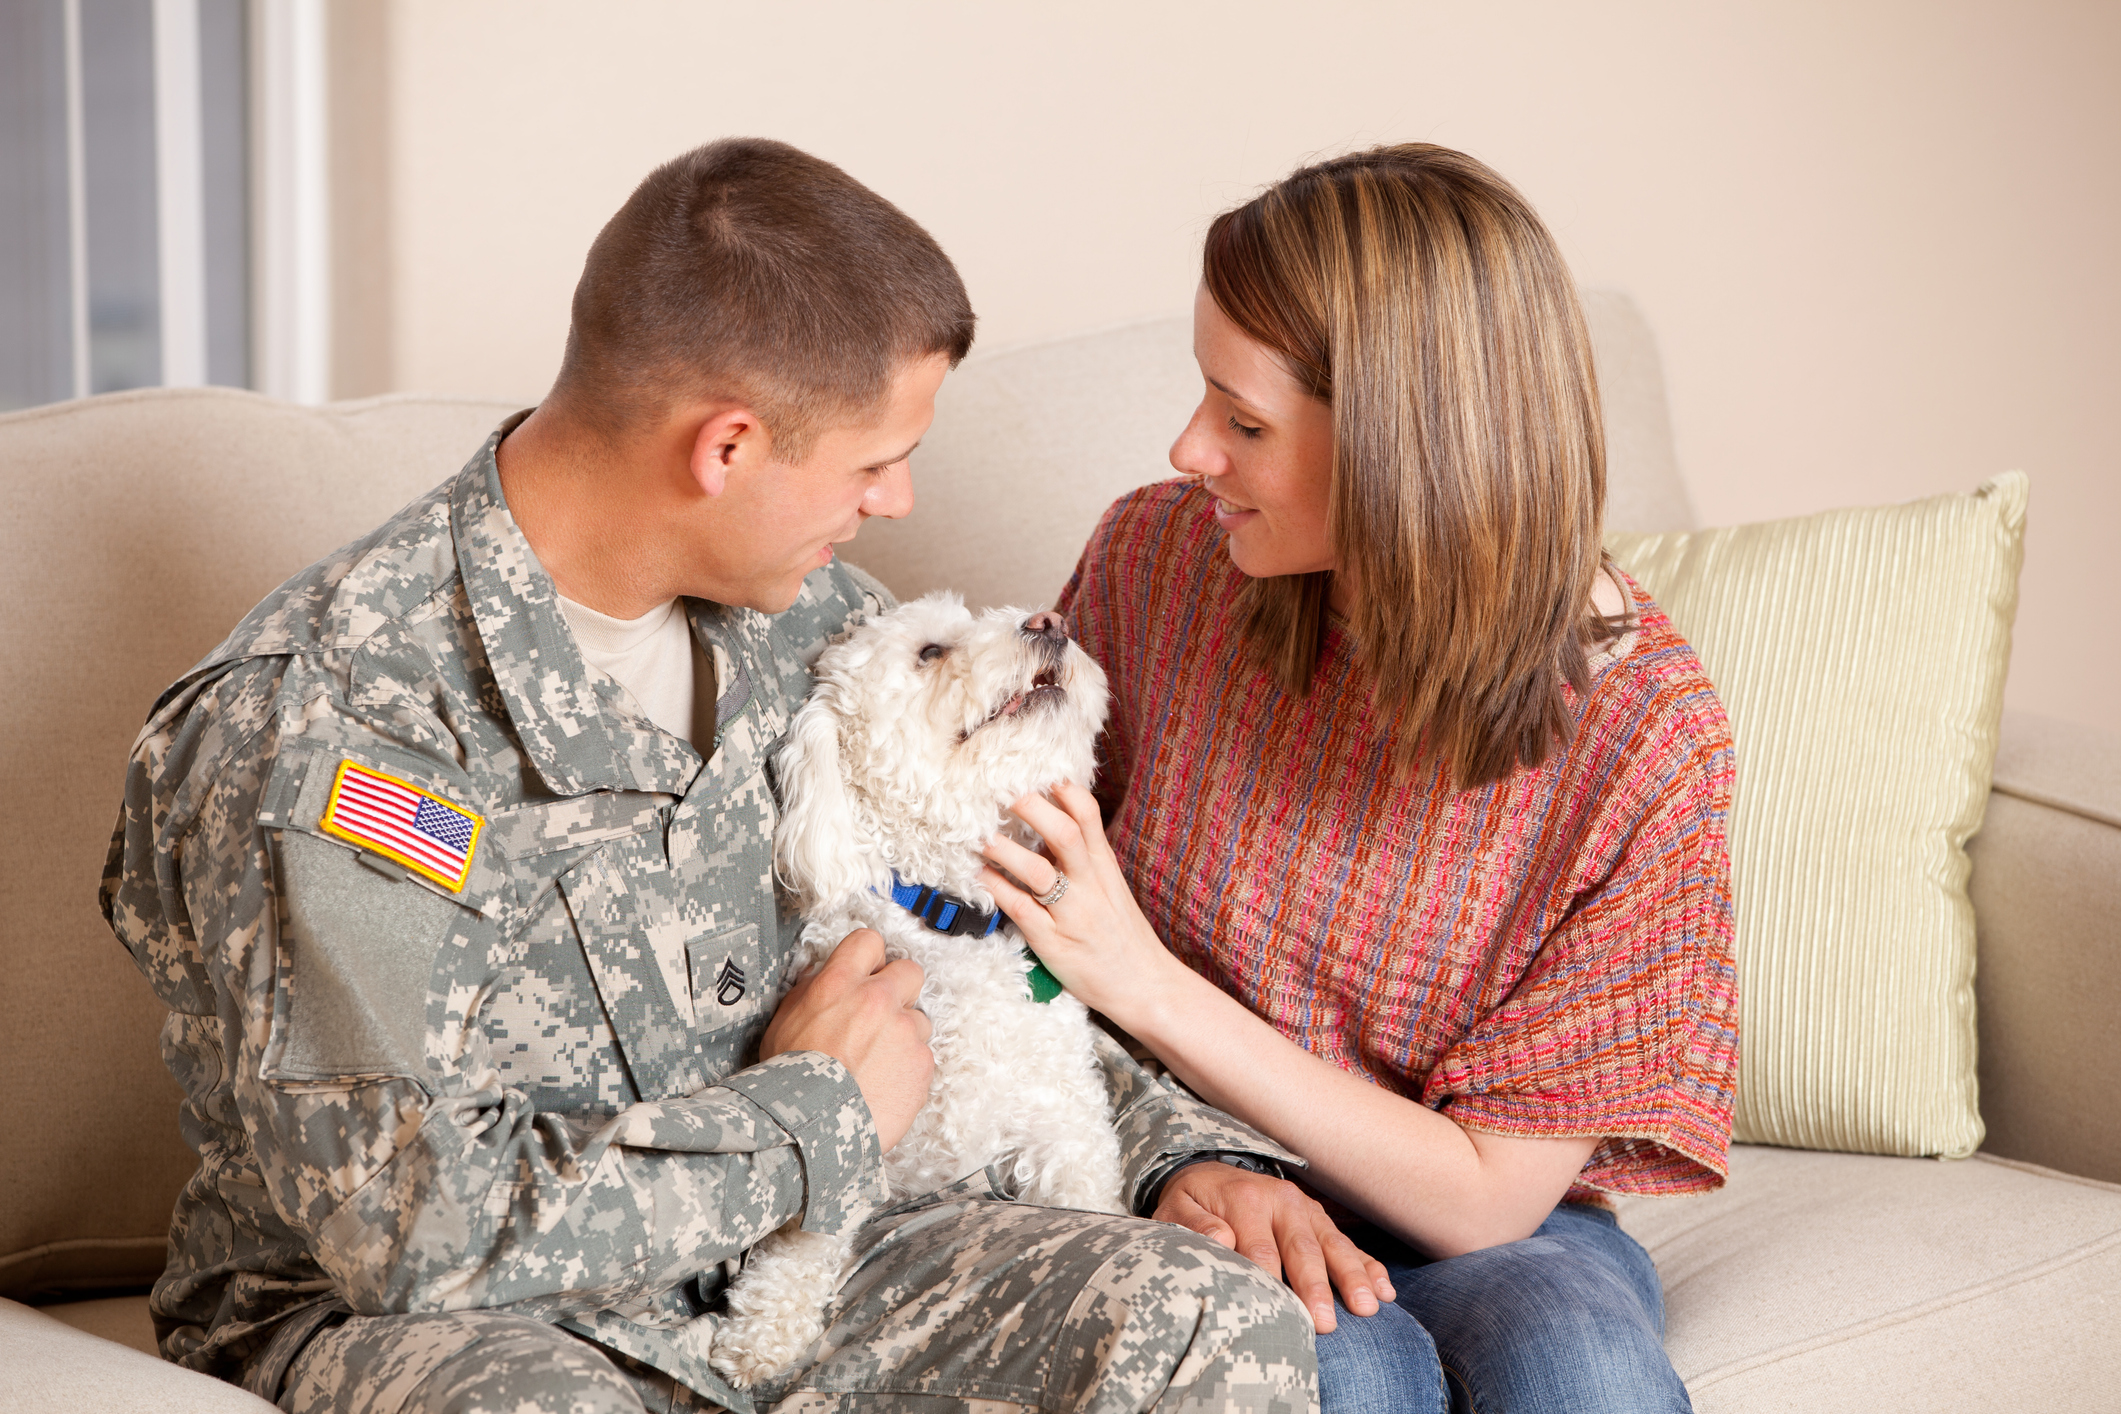 The NHF supports programs providing service dogs to veterans